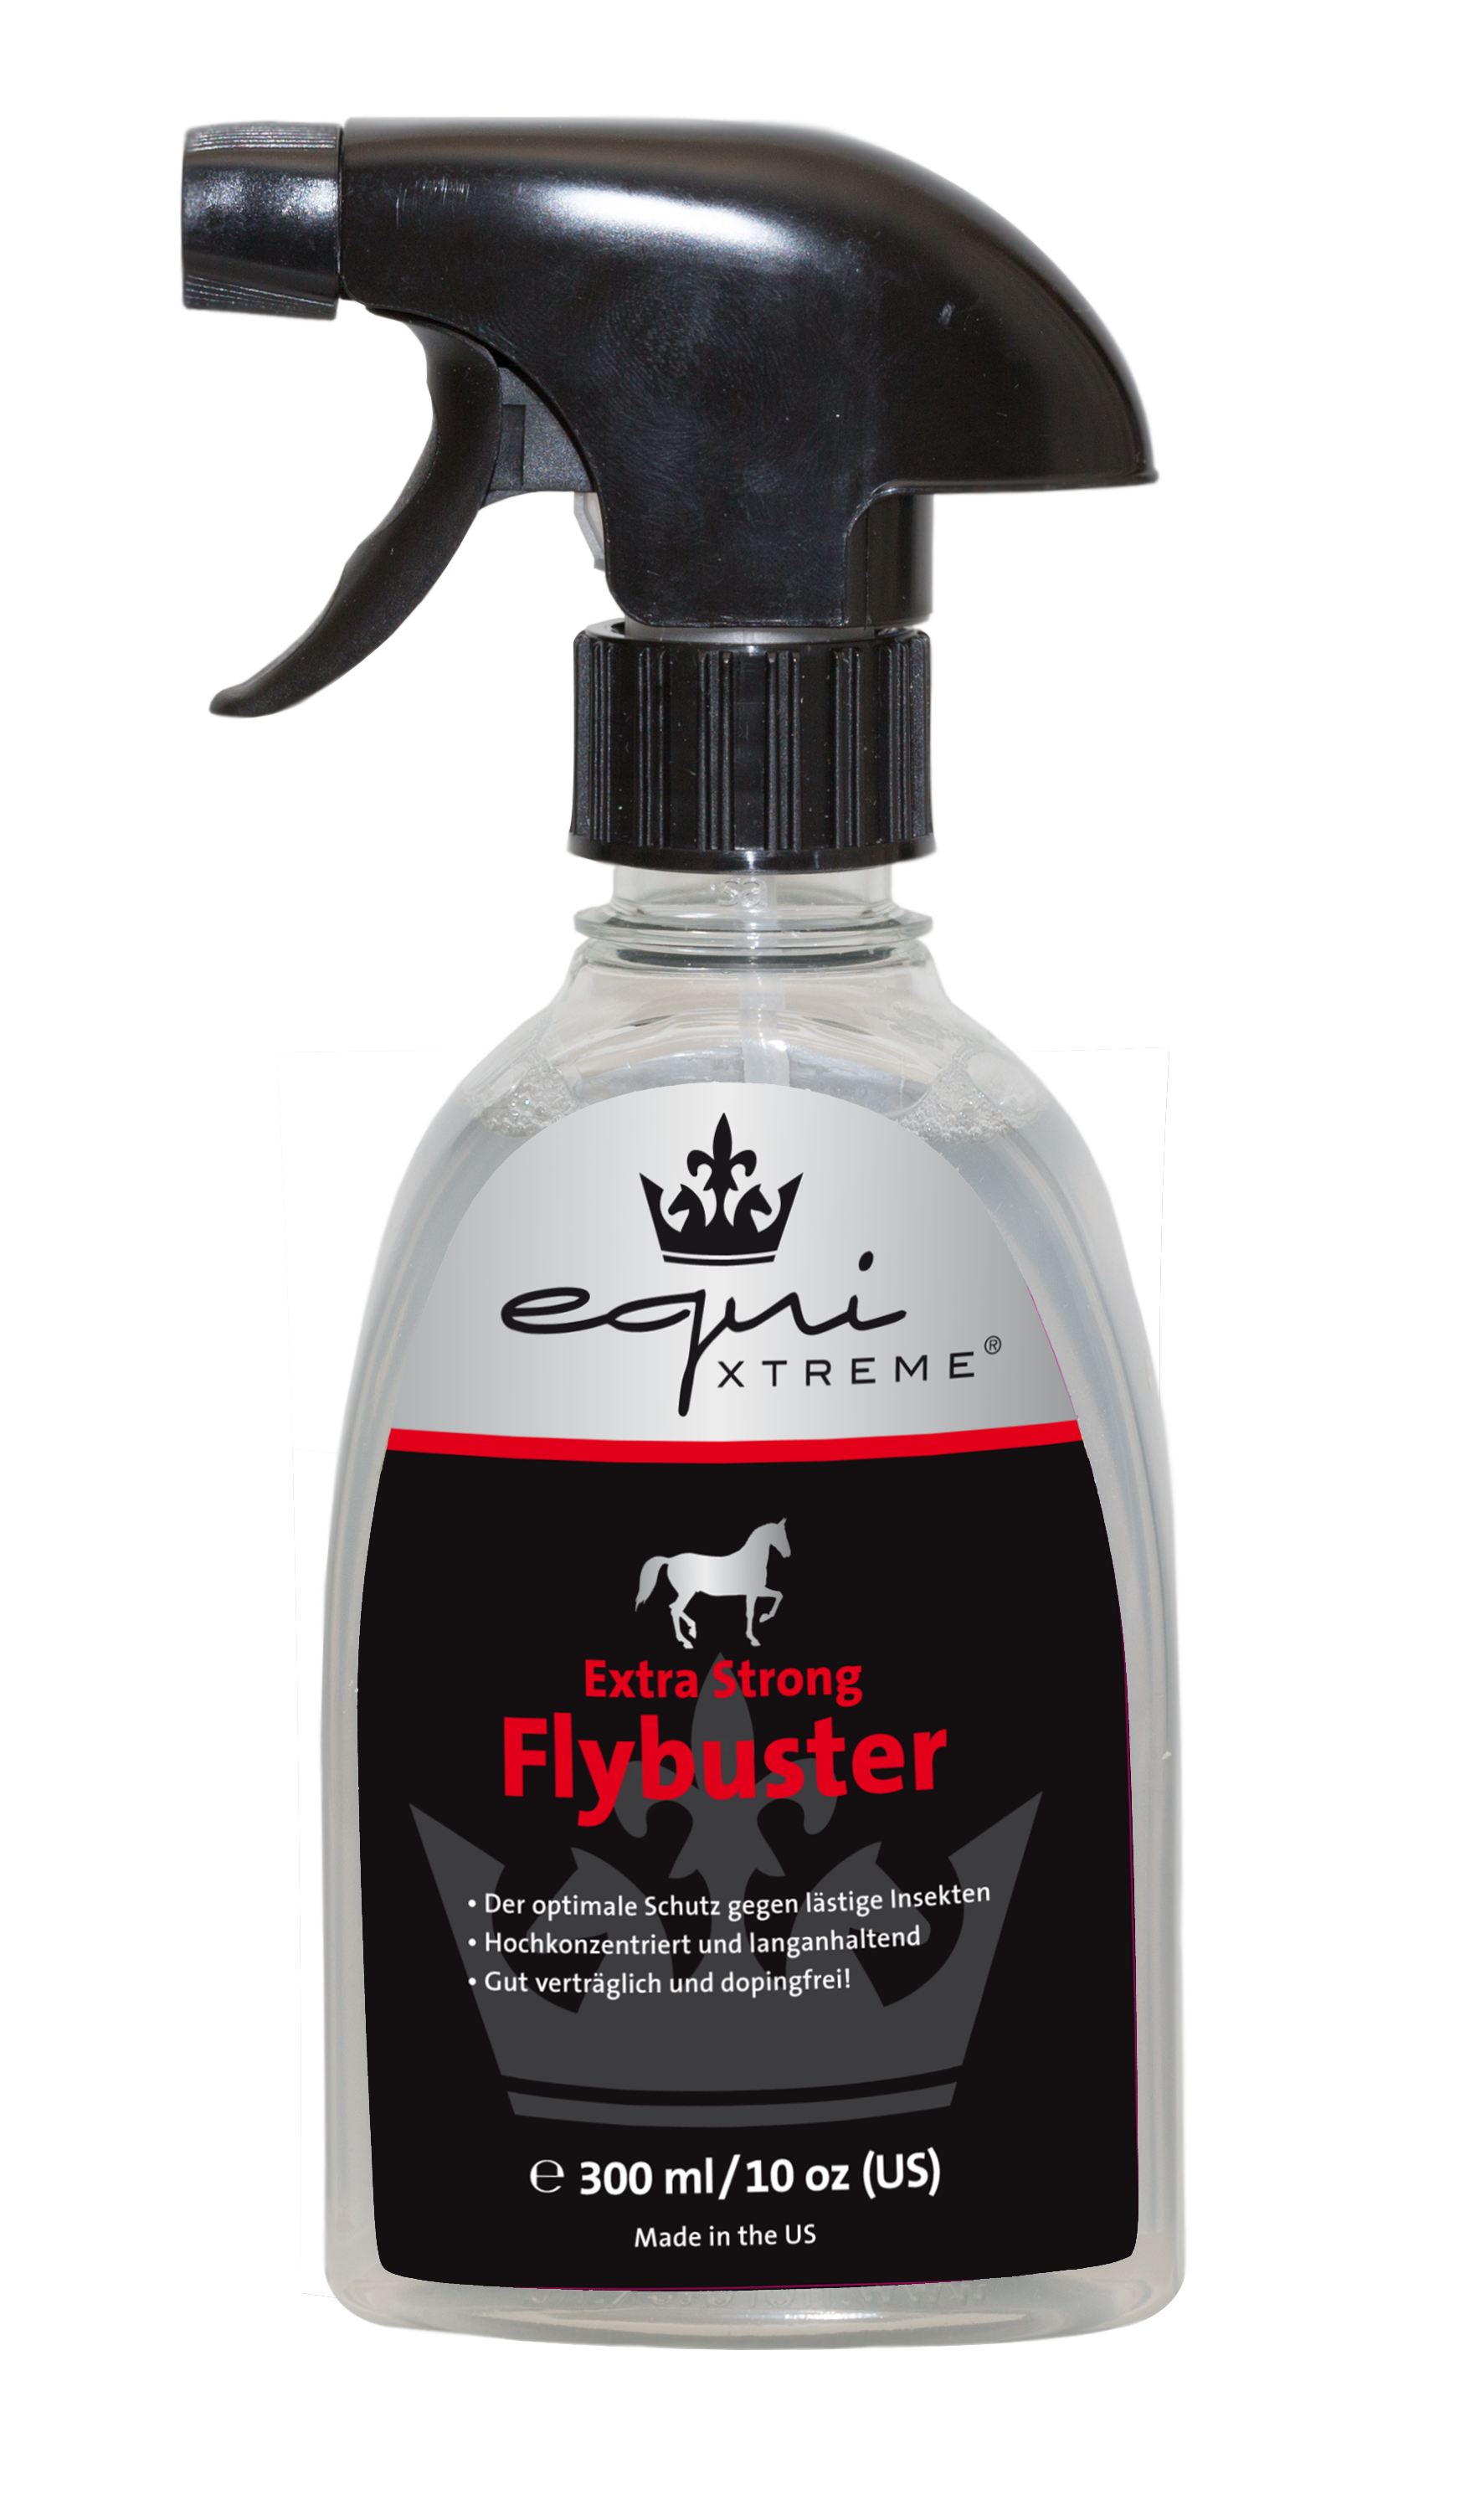 equiXTREME Flybuster